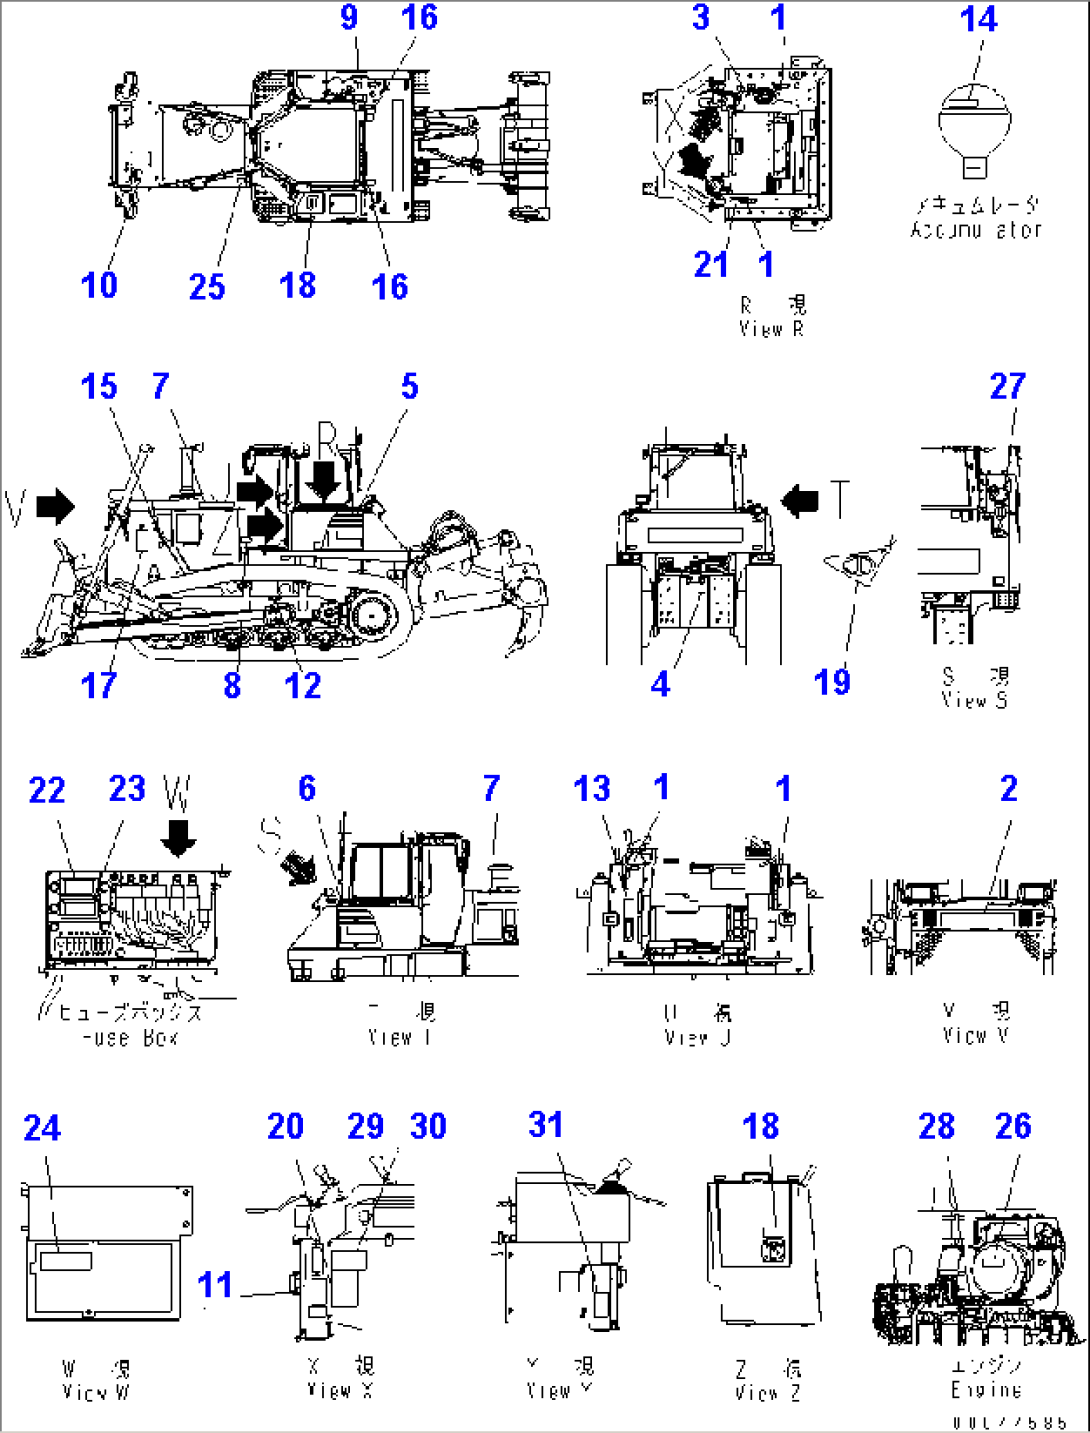 MARKS AND PLATES (PORTUGUESE)(#80001-80806)